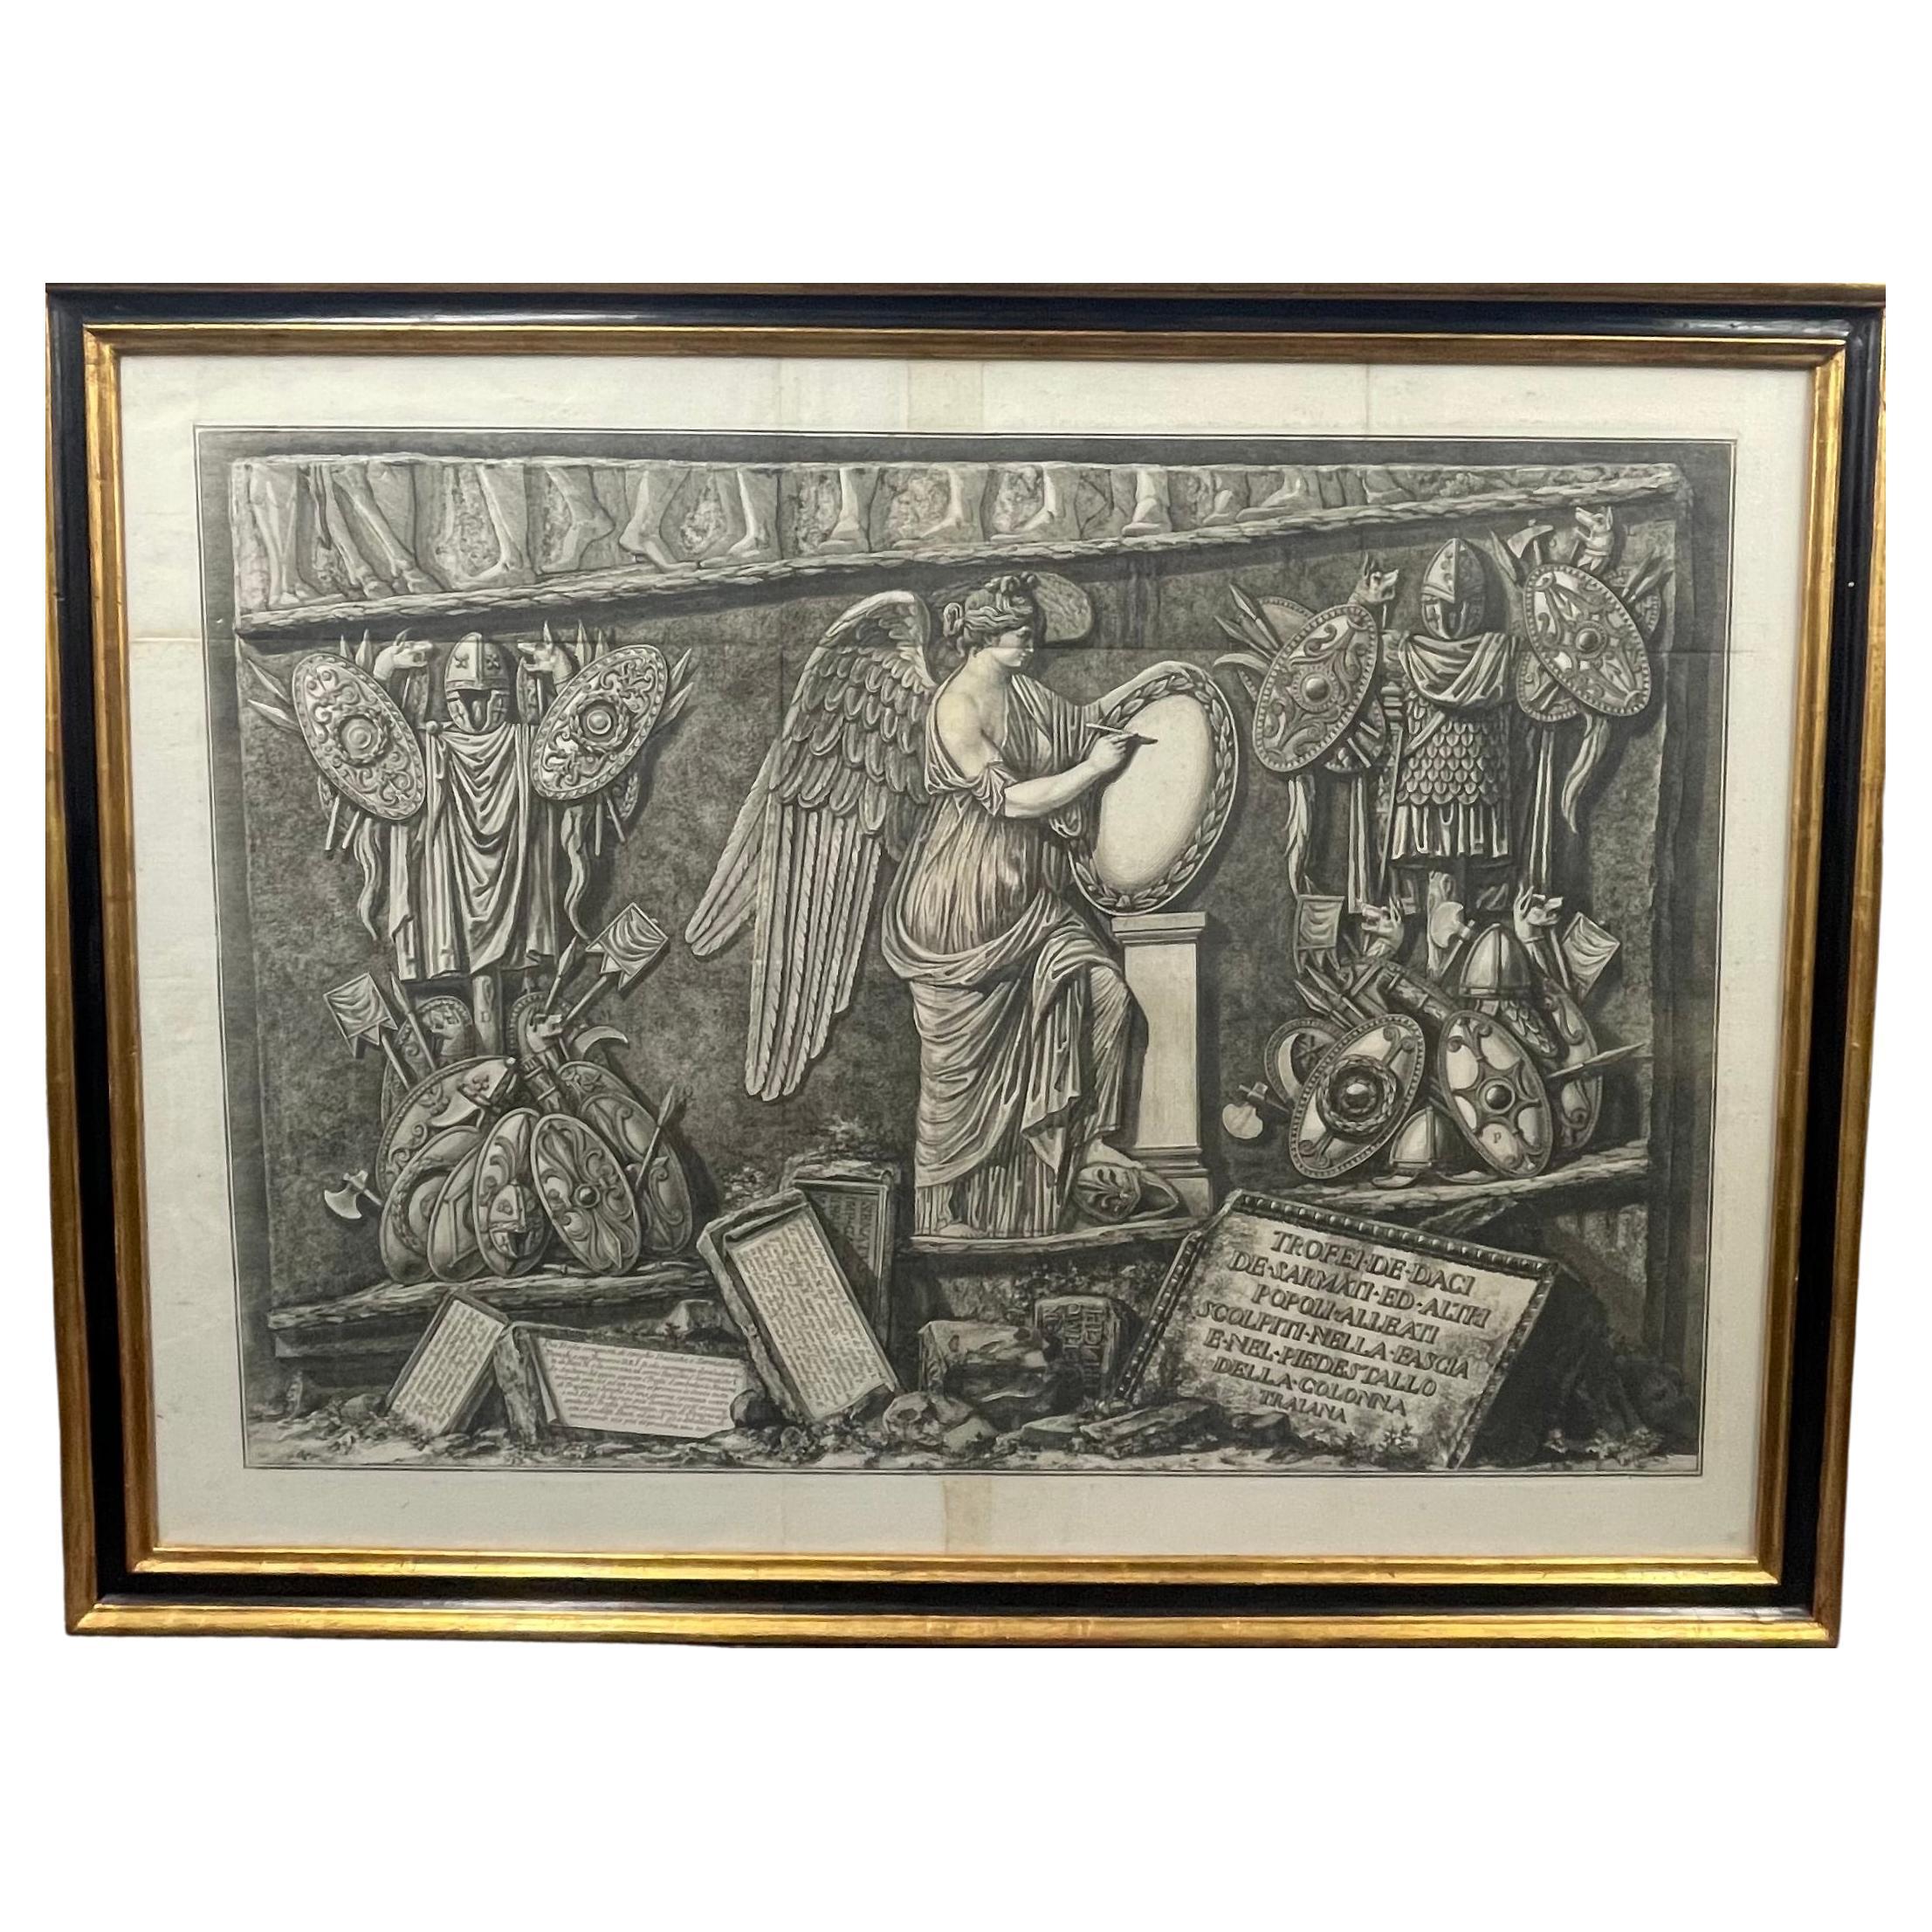 Piranesi engraving  "Trophy of the Dacians" "Bas-relief on Trajan's Column" For Sale